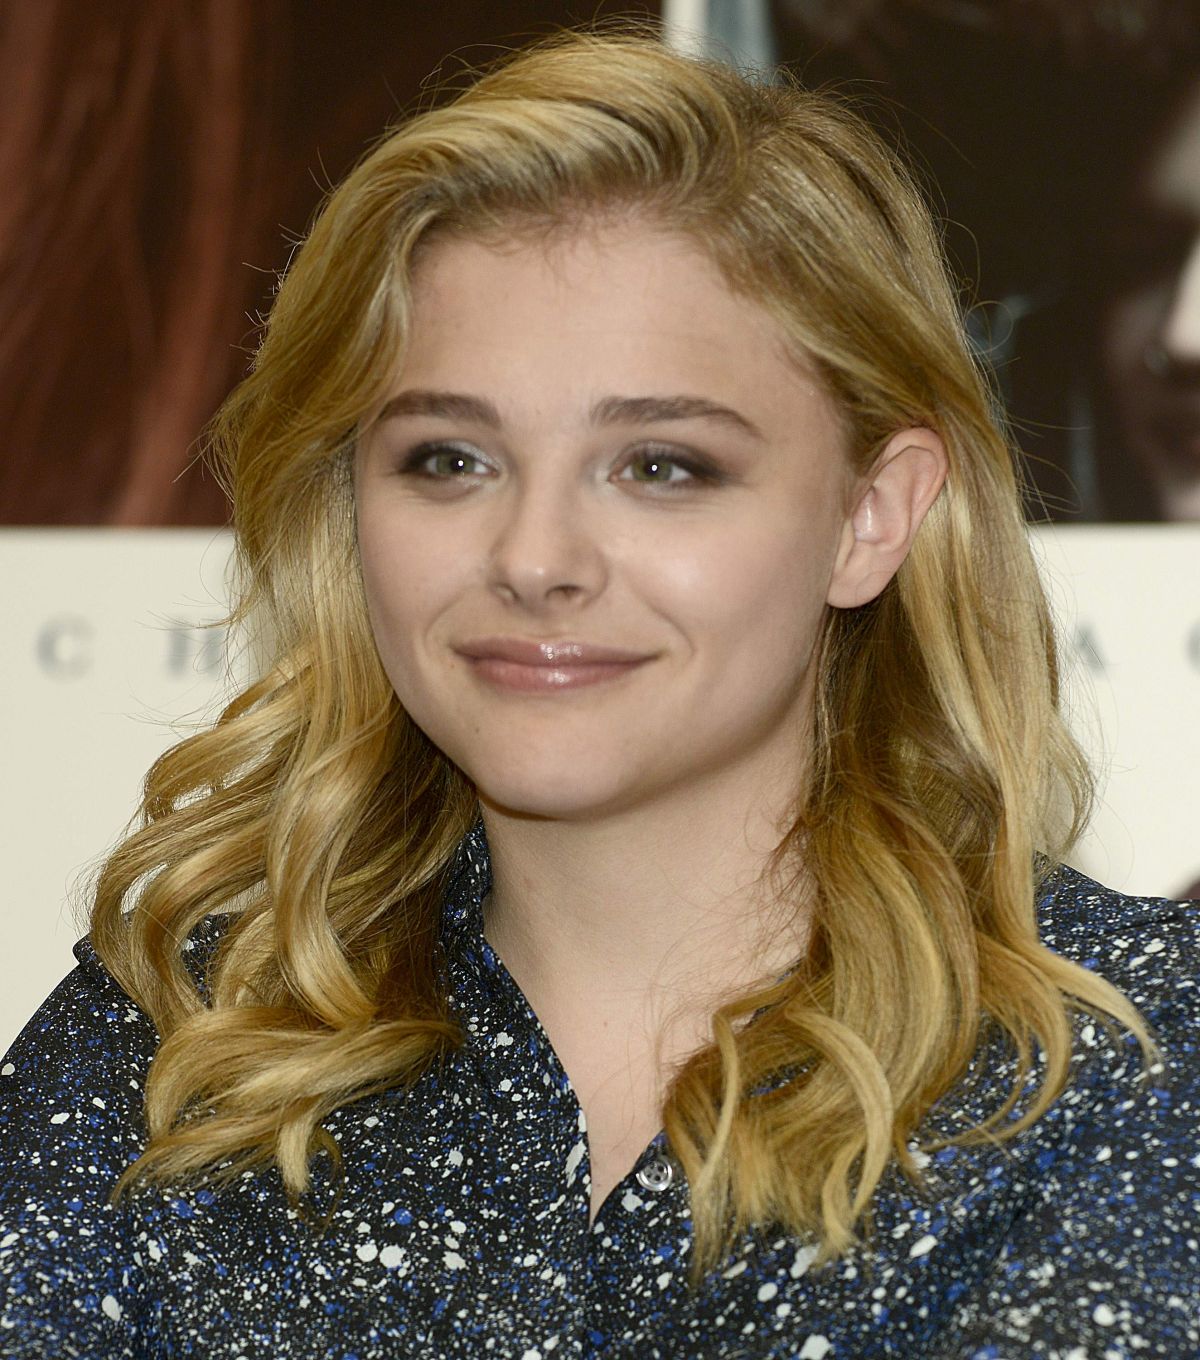 CHLOE MORETZ at If I Stay Book Signing in San Mateo – HawtCelebs